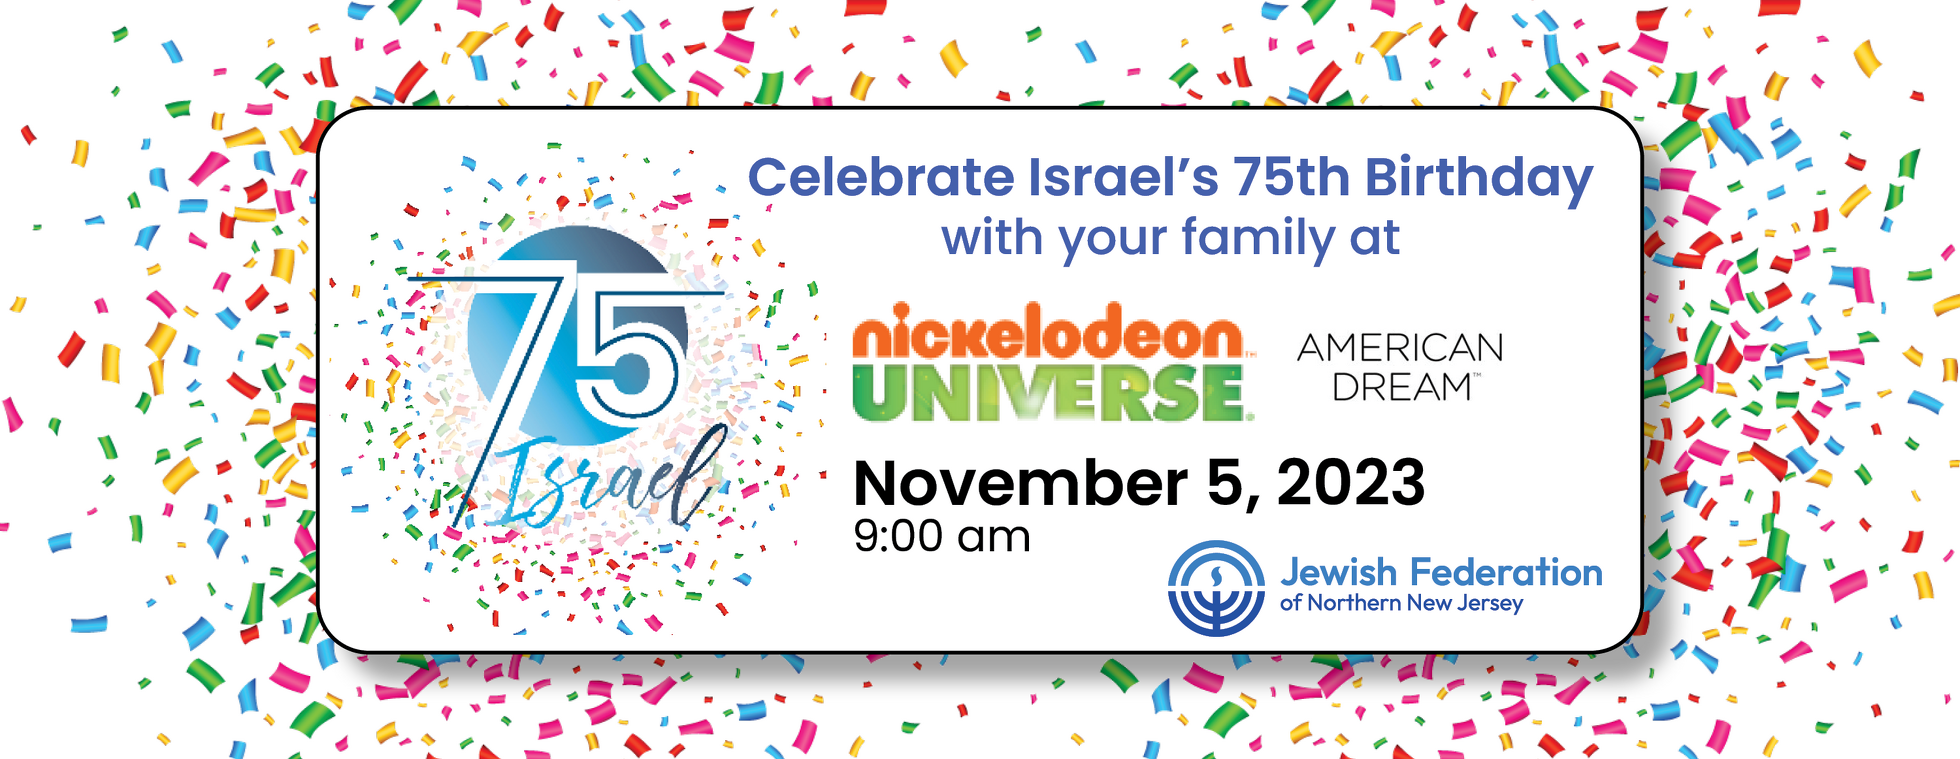 Israel at 75 Birthday Party - Nickelodeon Universe - American Dream